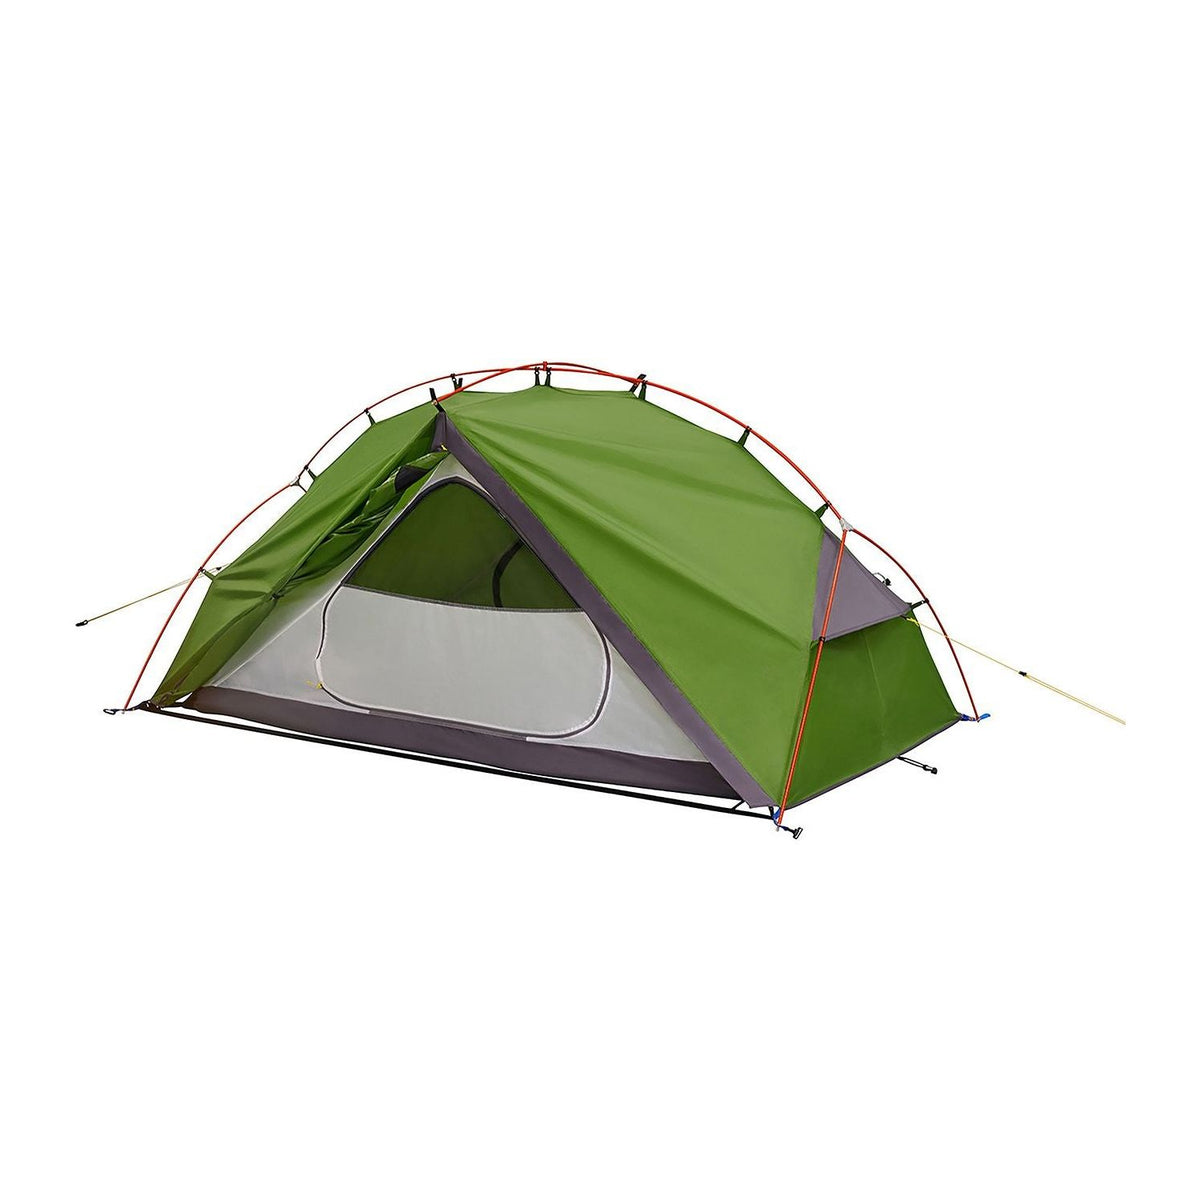 Wild Country Panacea 2 Two-Person Tent - Green